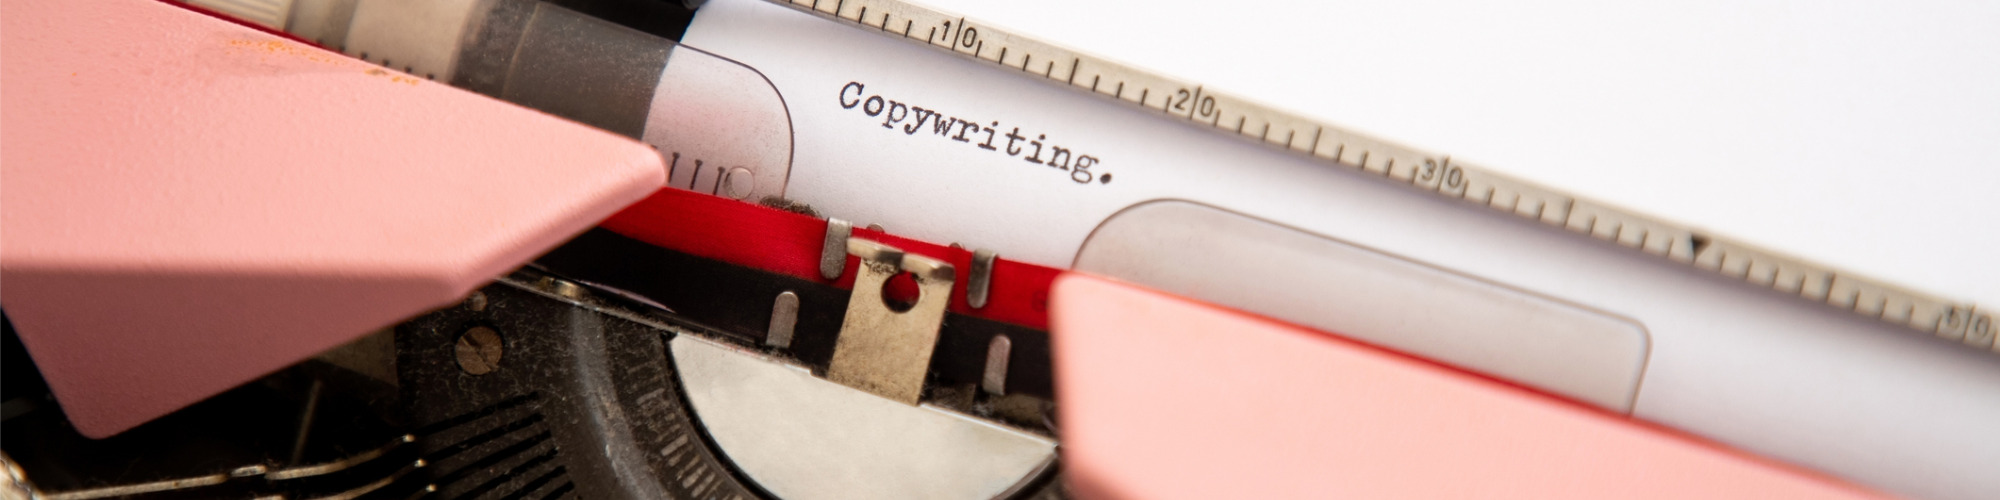 Copywriting Basics and Using AI for Content Writing